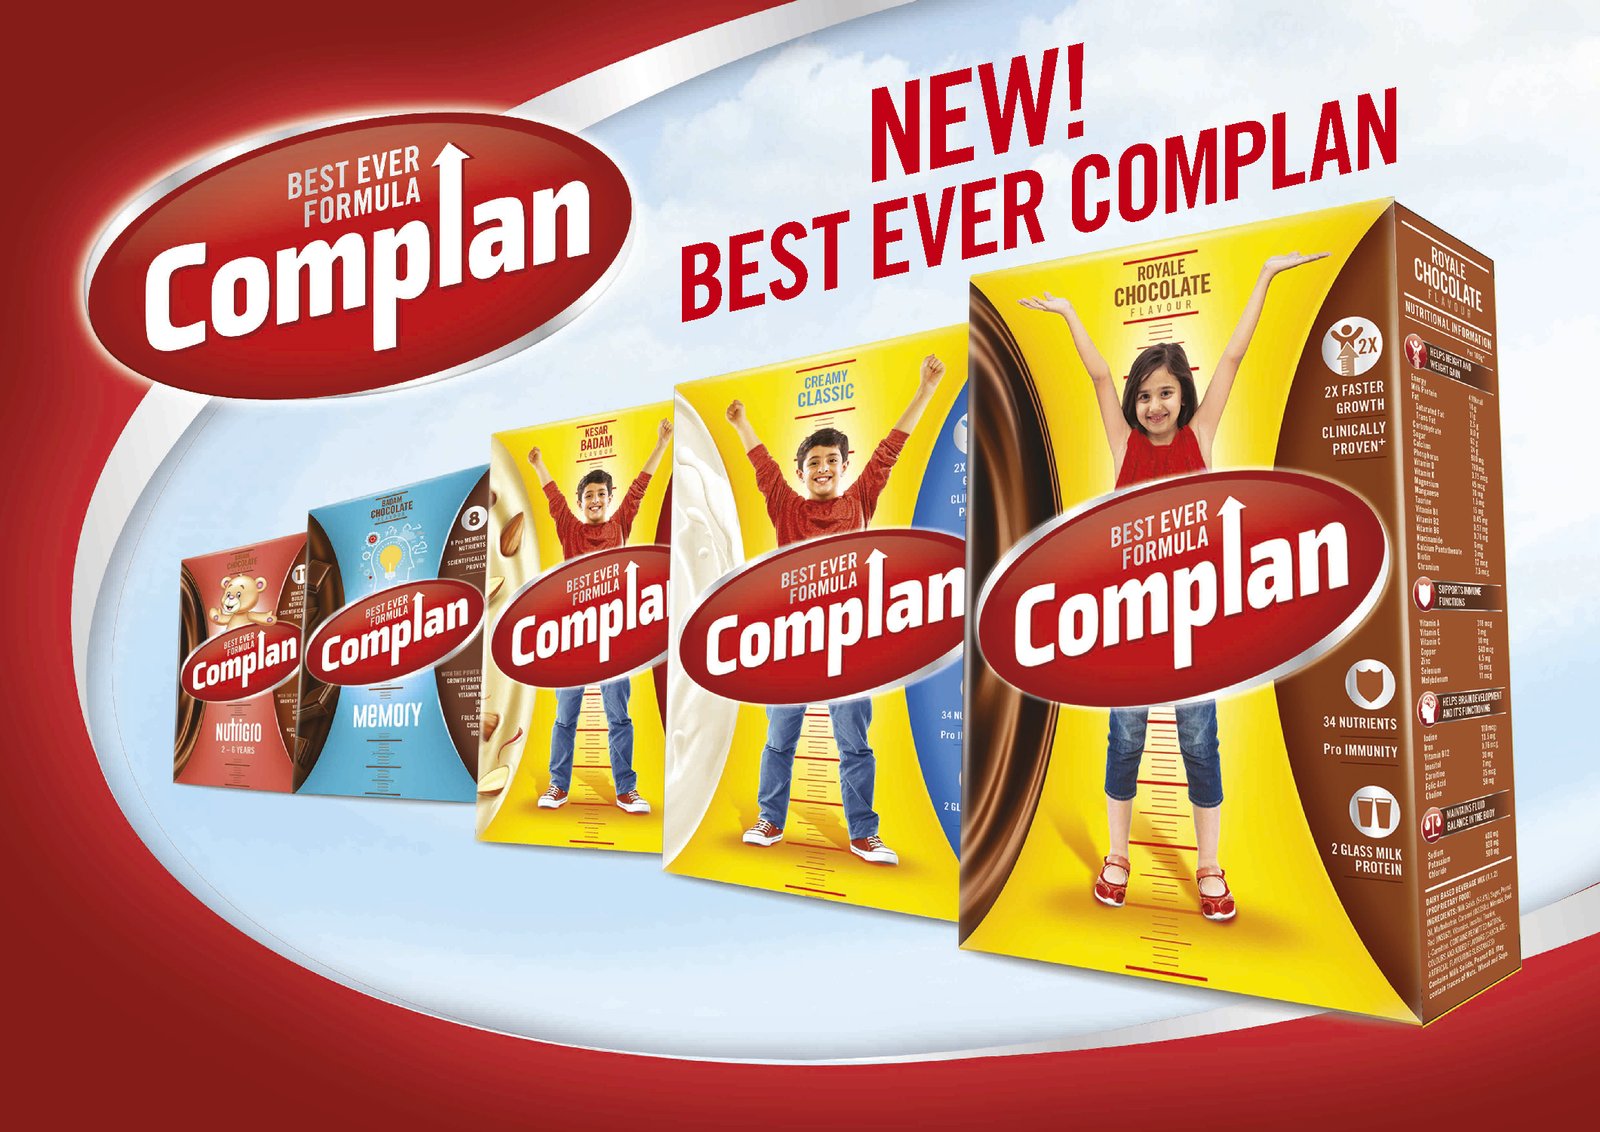 heinz-india-to-spend-rs-100-crore-for-relaunching-complan